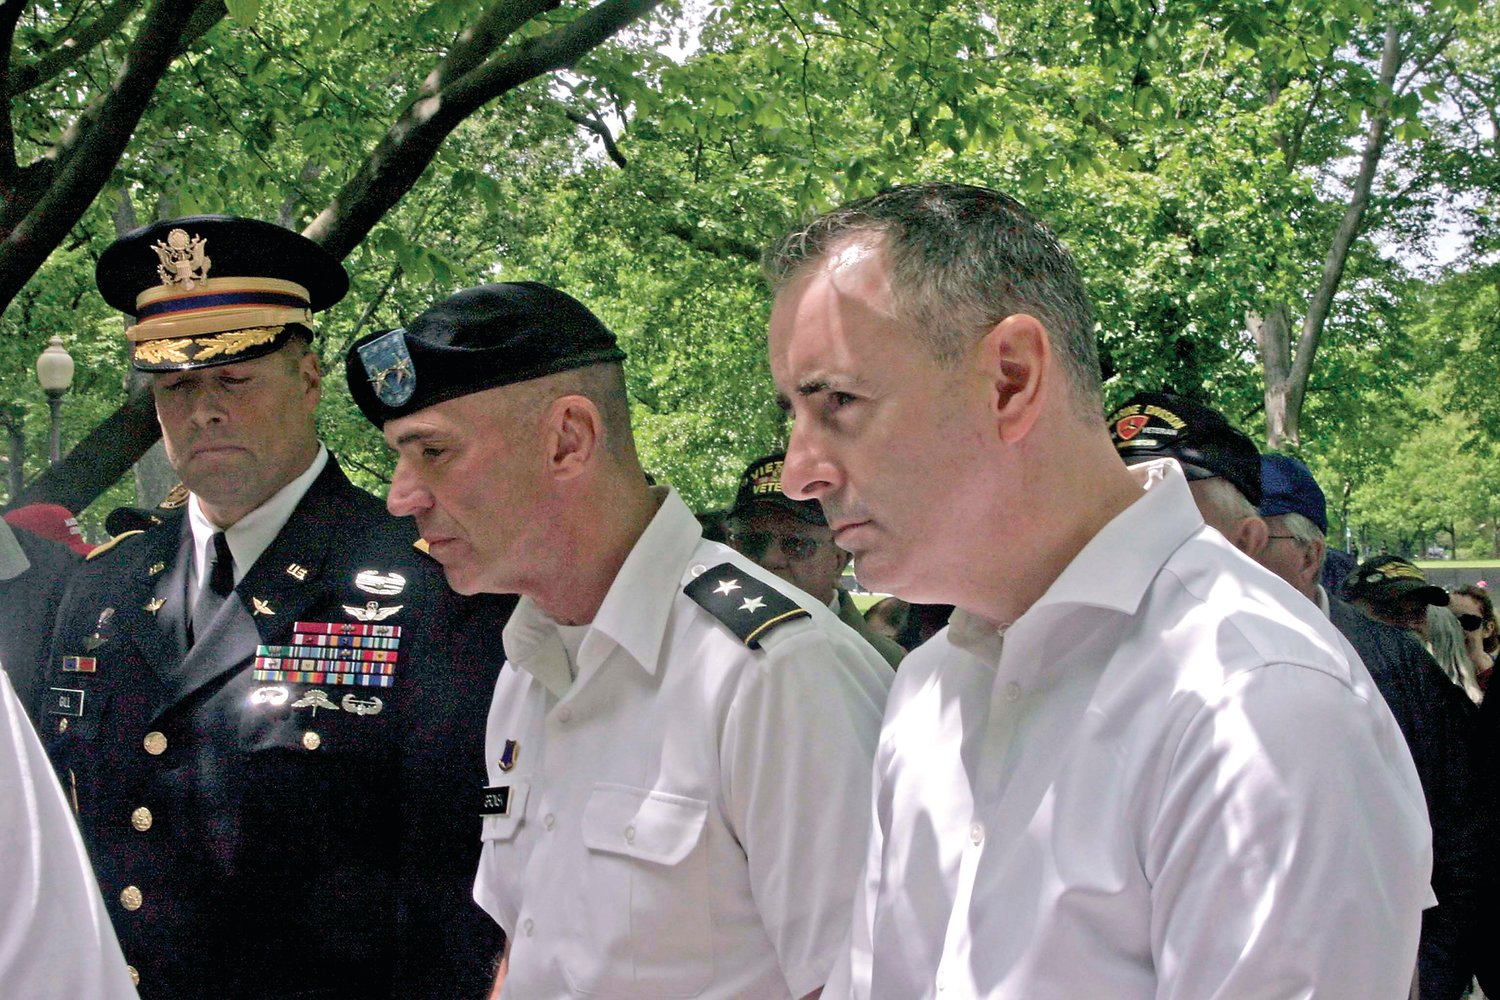 At the wreath laying ceremony are, from left, Col. Clair Gill, Maj. Gen. John Gronski and U.S. Rep. Brian Fitzpatrick.